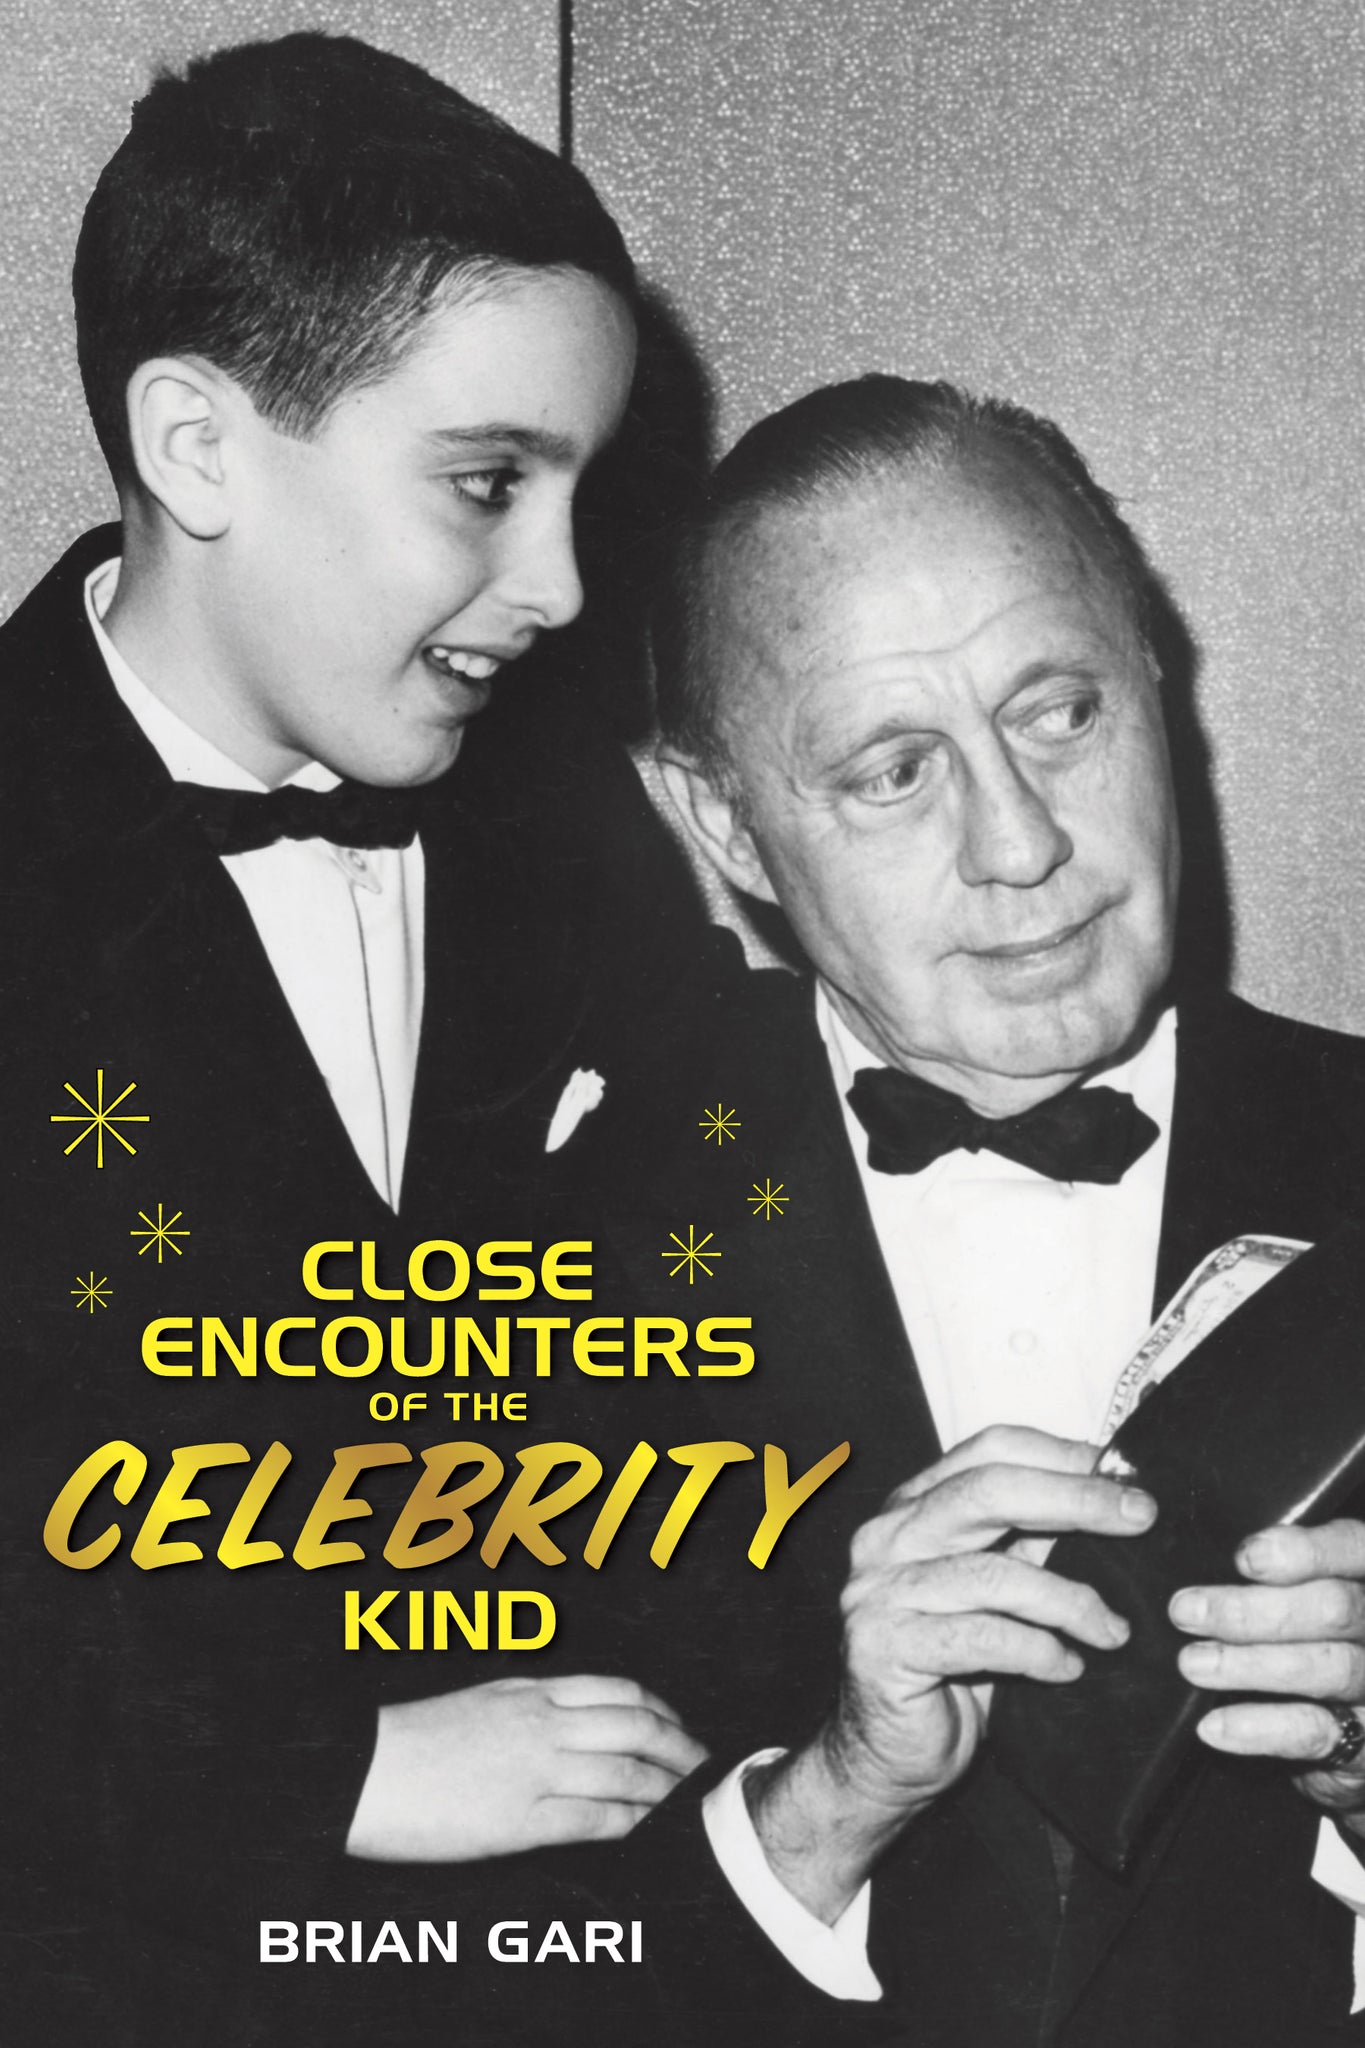 CLOSE ENCOUNTERS OF THE CELEBRITY KIND (paperback)